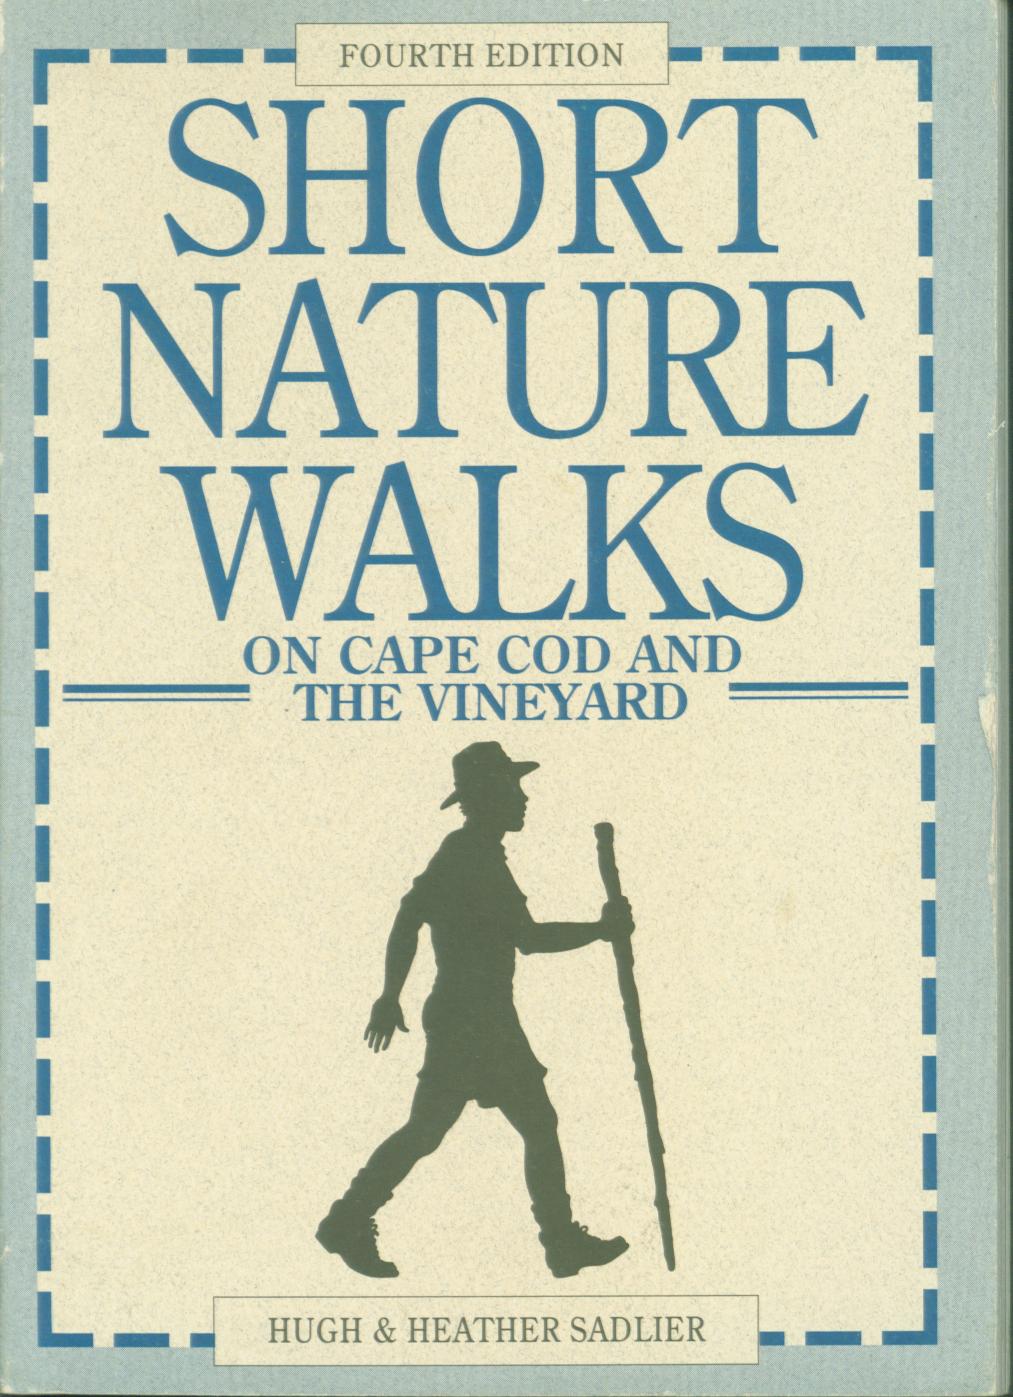 SHORT NATURE WALKS ON CAPE COD AND THE VINEYARD.